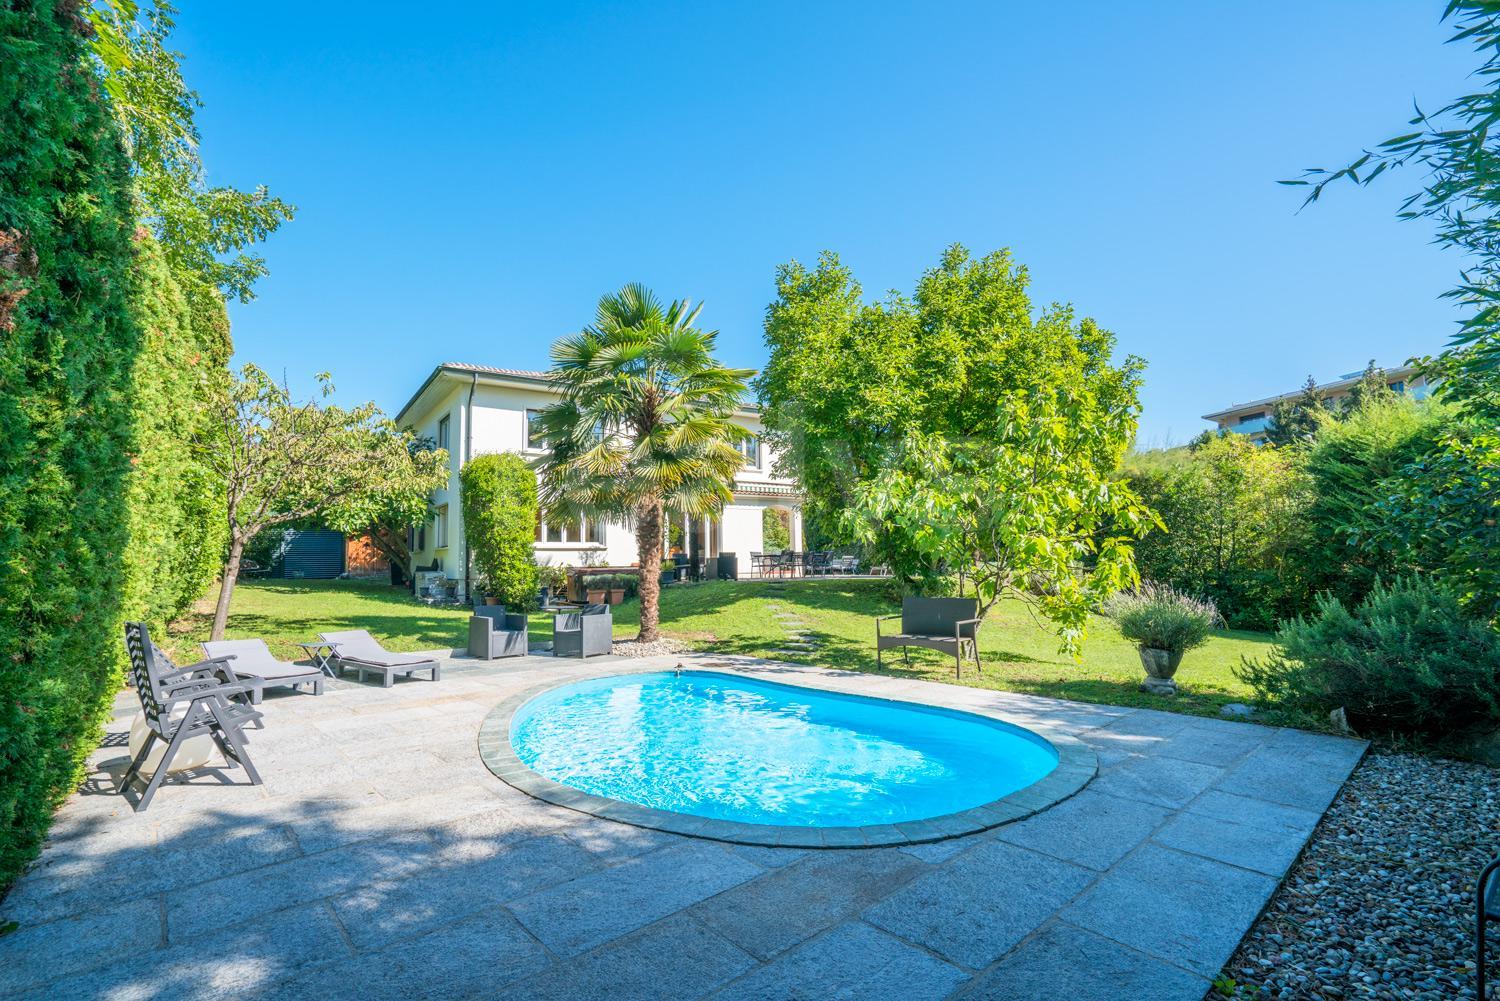 PrivaliaCharming individual villa in an oasis in the heart of the city center